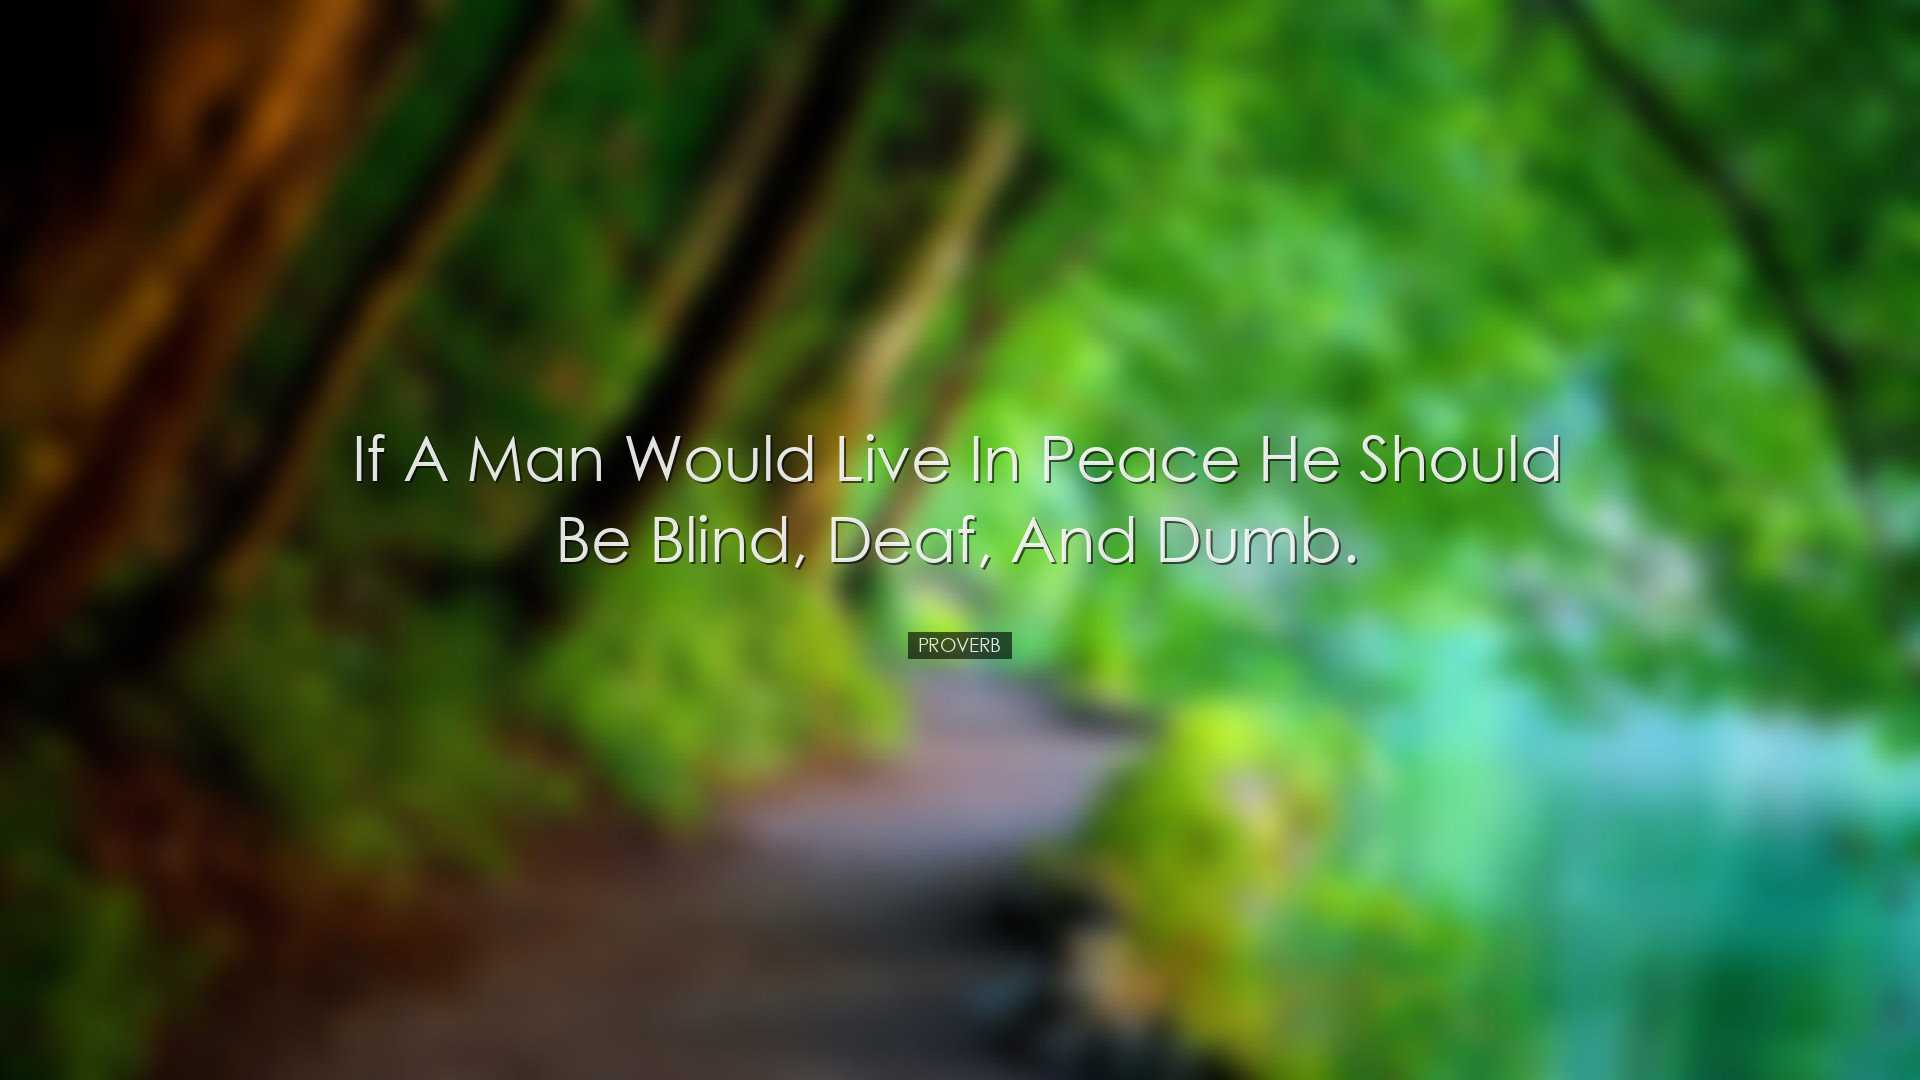 If a man would live in peace he should be blind, deaf, and dumb. -